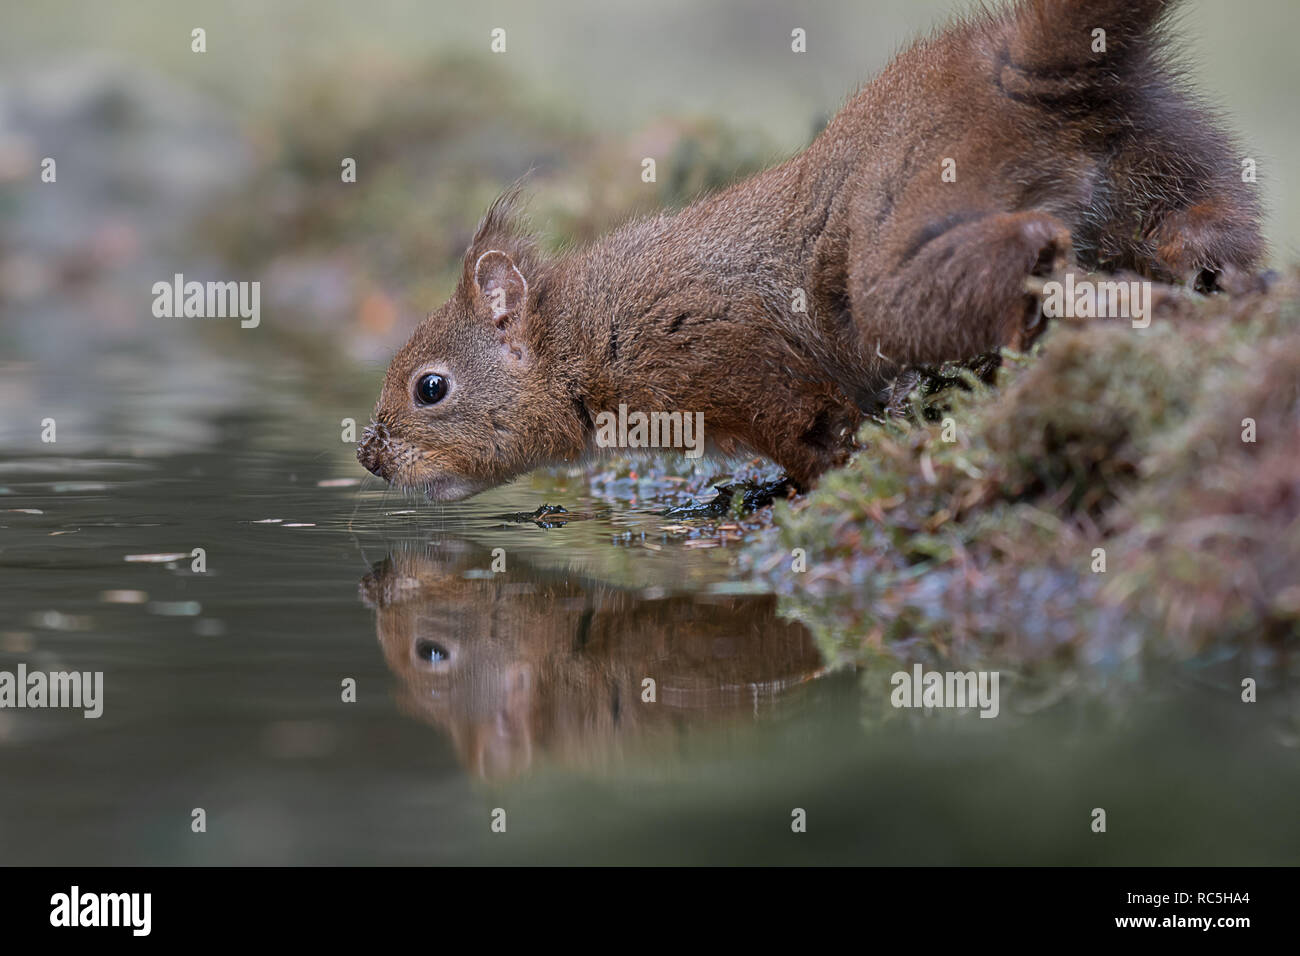 A close up of a red squirrel by the waters edge taking a drink with its reflection in the water. Taken at a low level Stock Photo